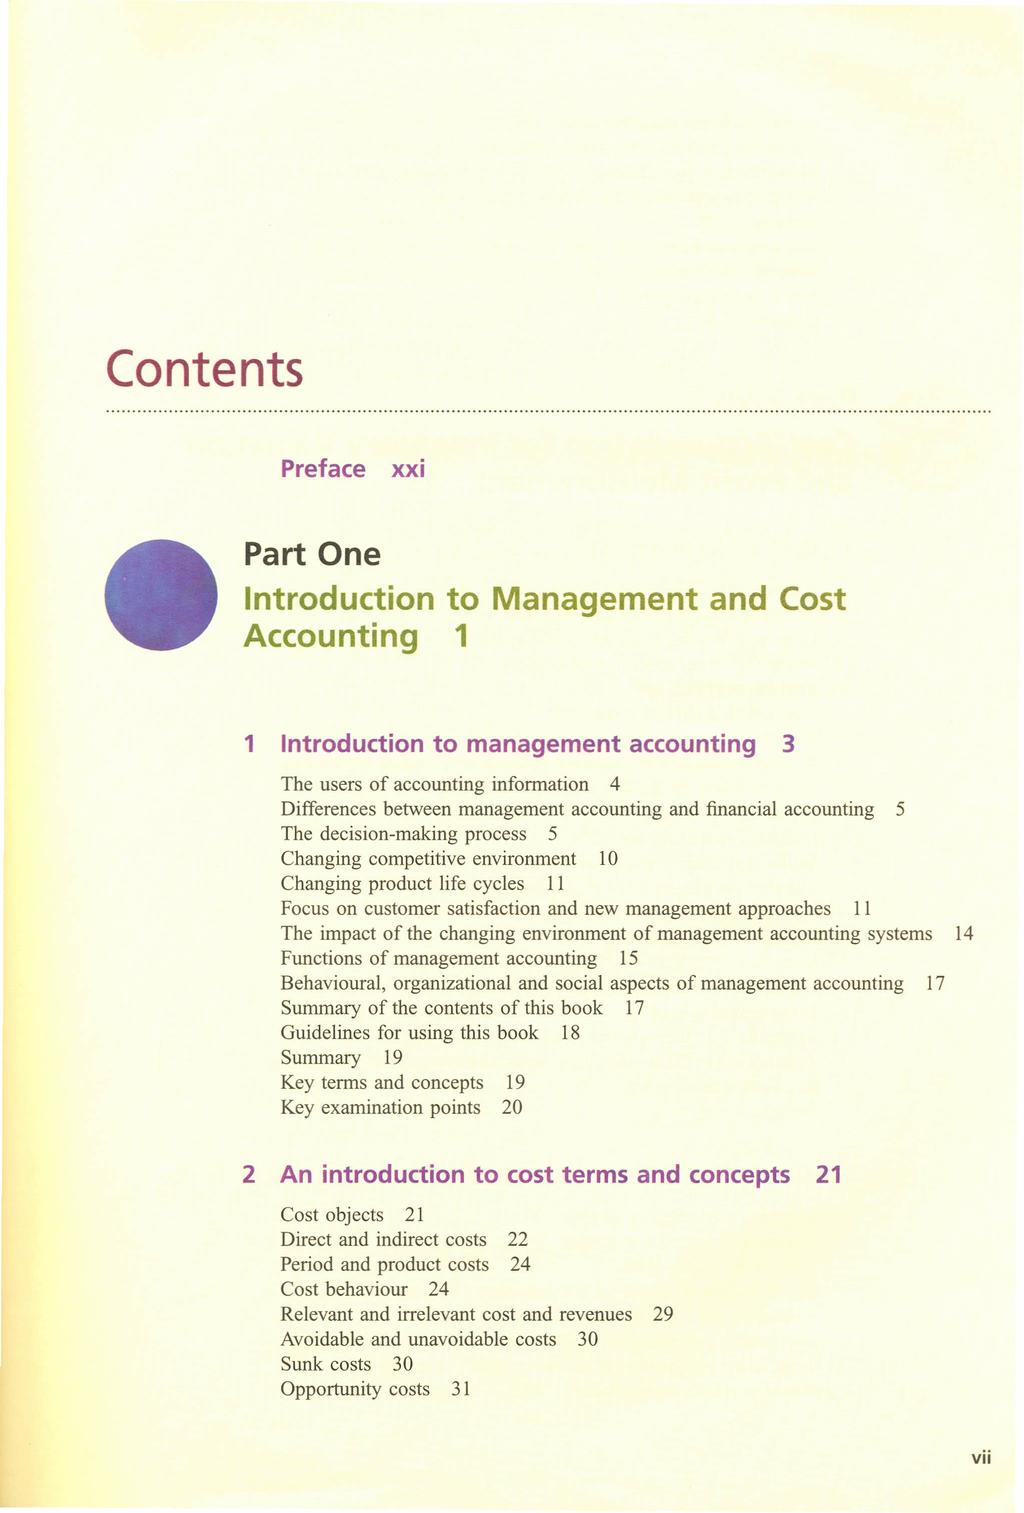 Contents Preface xxi Part One Introduction to Management Accounting 1 and Cost 1 Introduction to management accounting 3 The users of accounting inforrnation 4 Differences between management